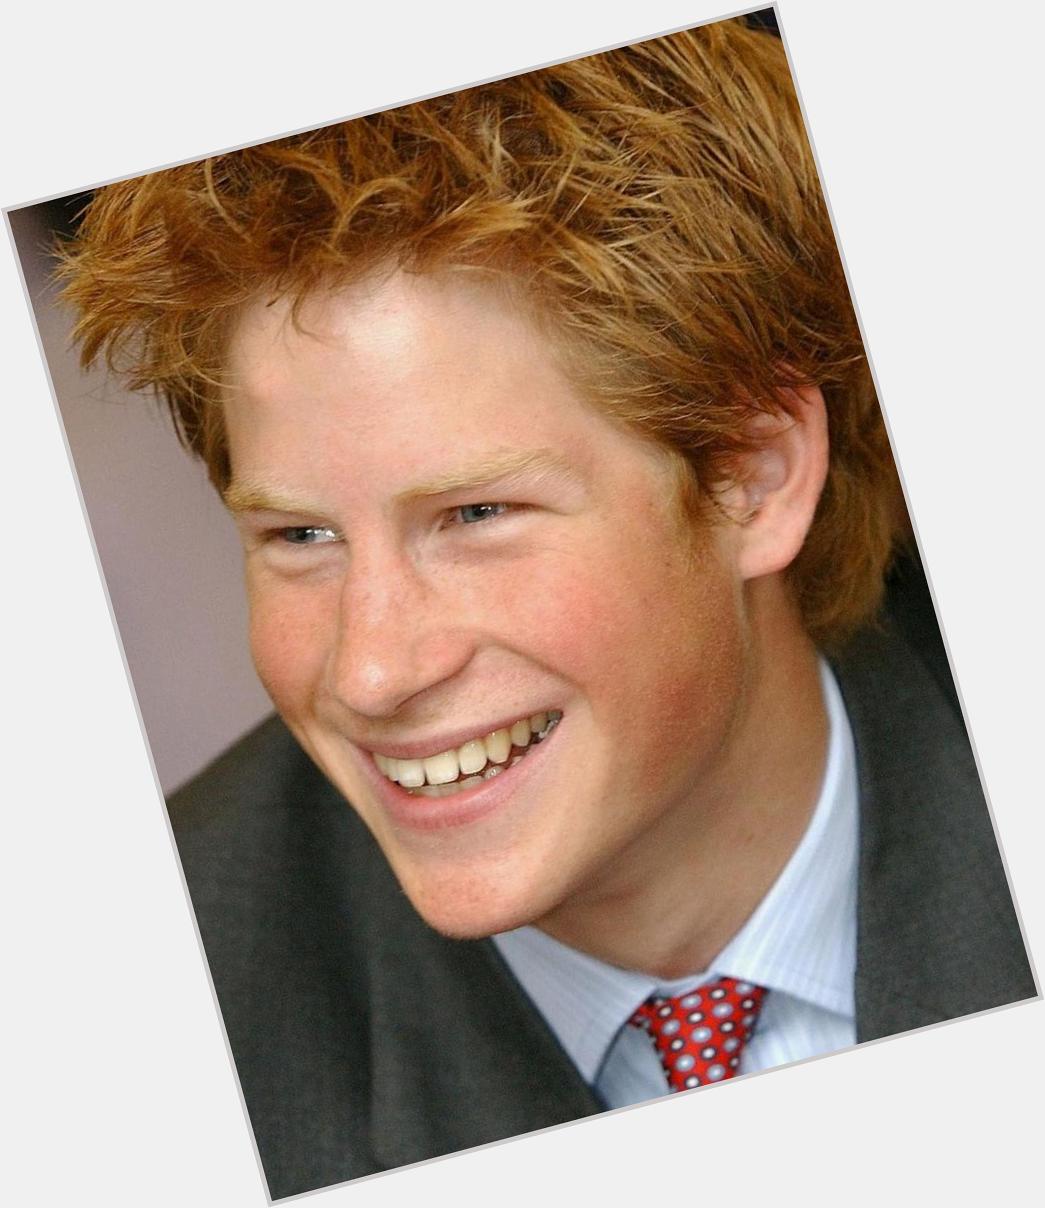 Happy Birthday Prince Harry 31 today,never change lovely boy,luv ya just the way you are 